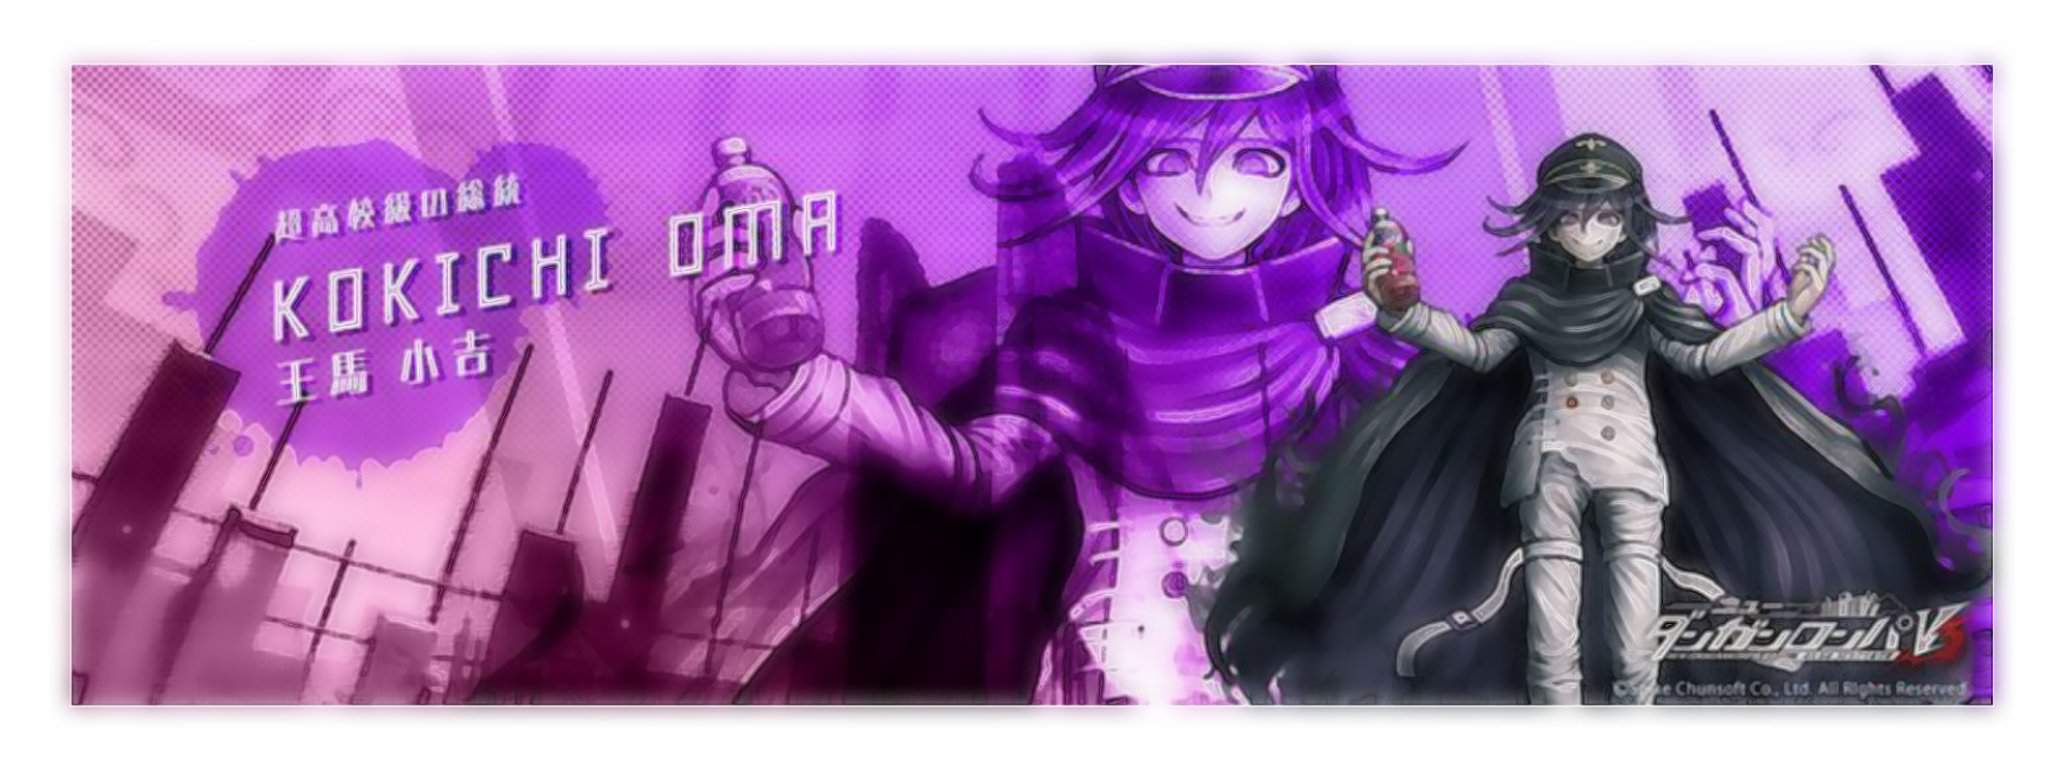 You are Alone Kokichi, and always will be